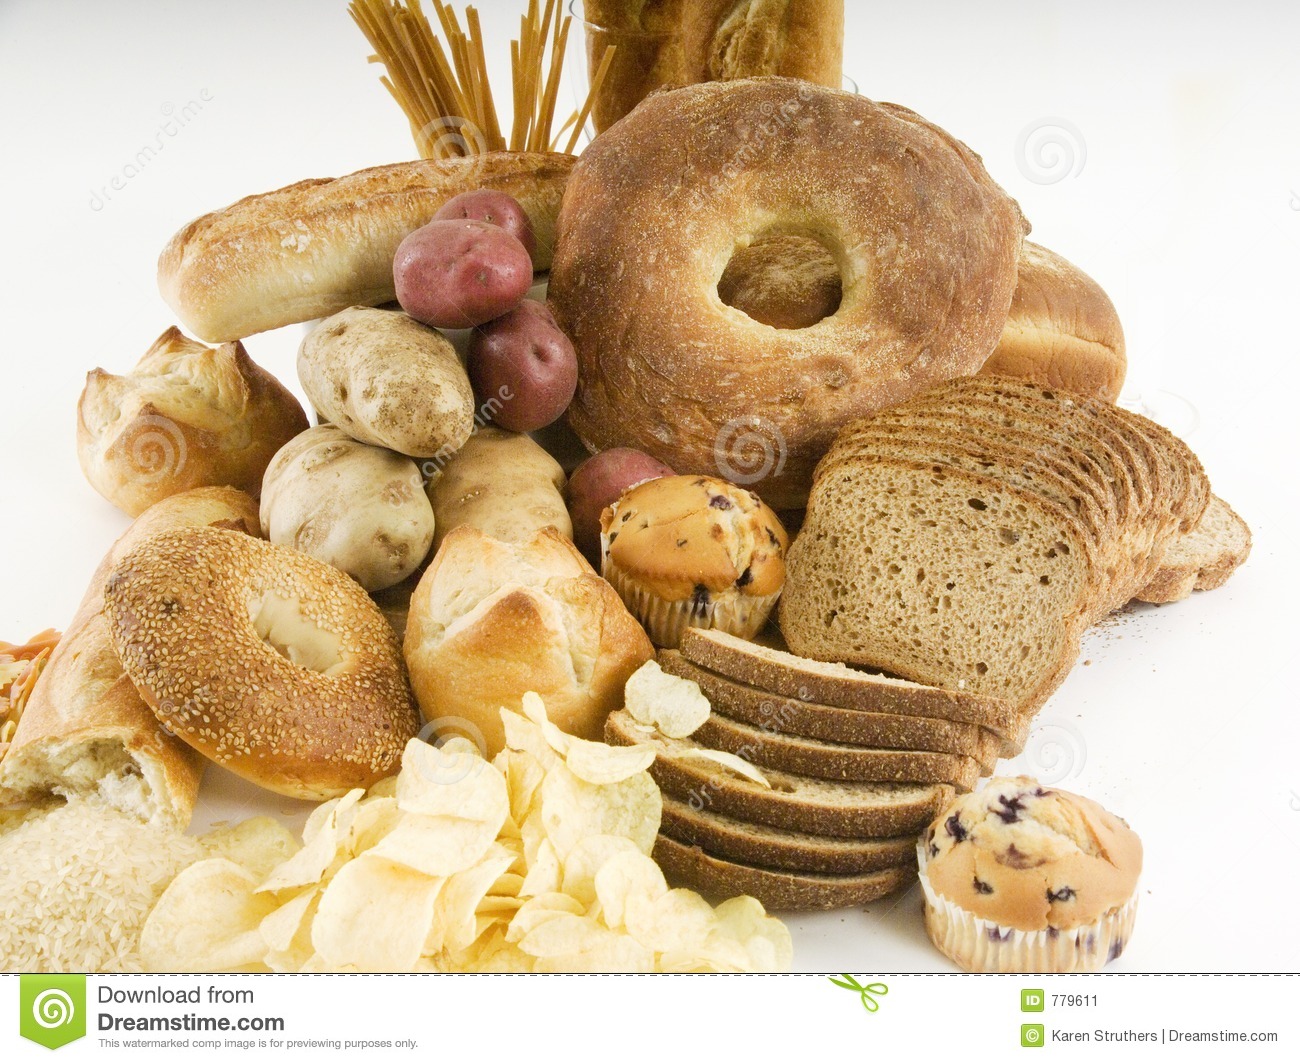 Different Starchy Foods Stock Image   Image  779611